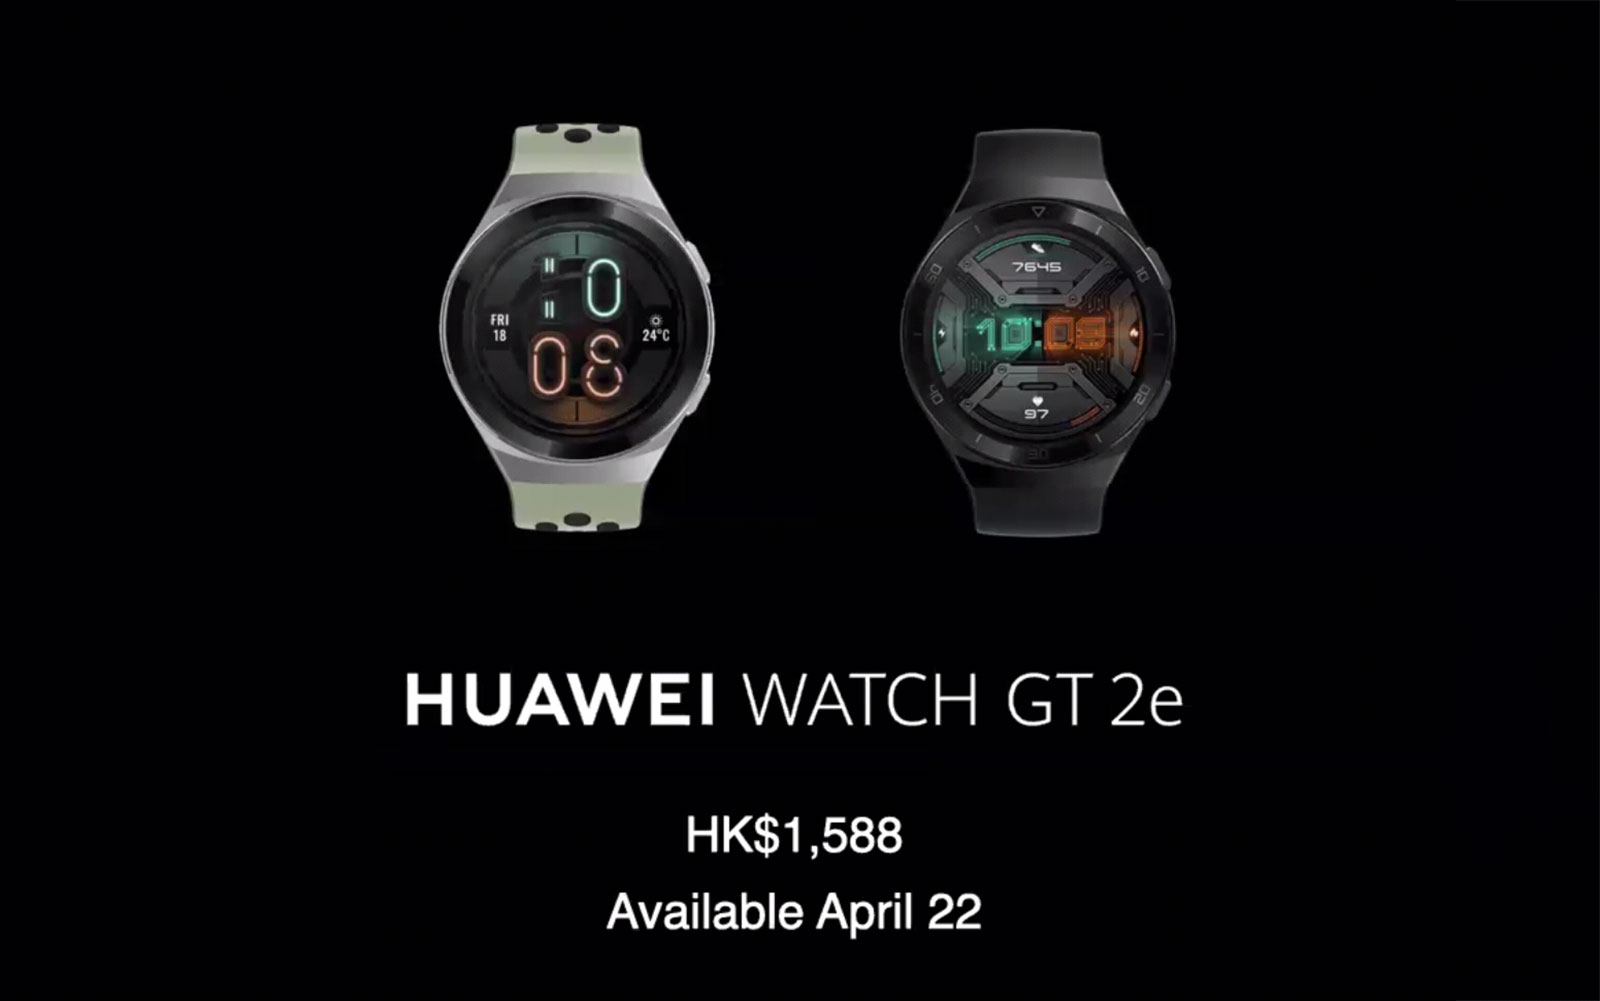 Huawei 5G products HK